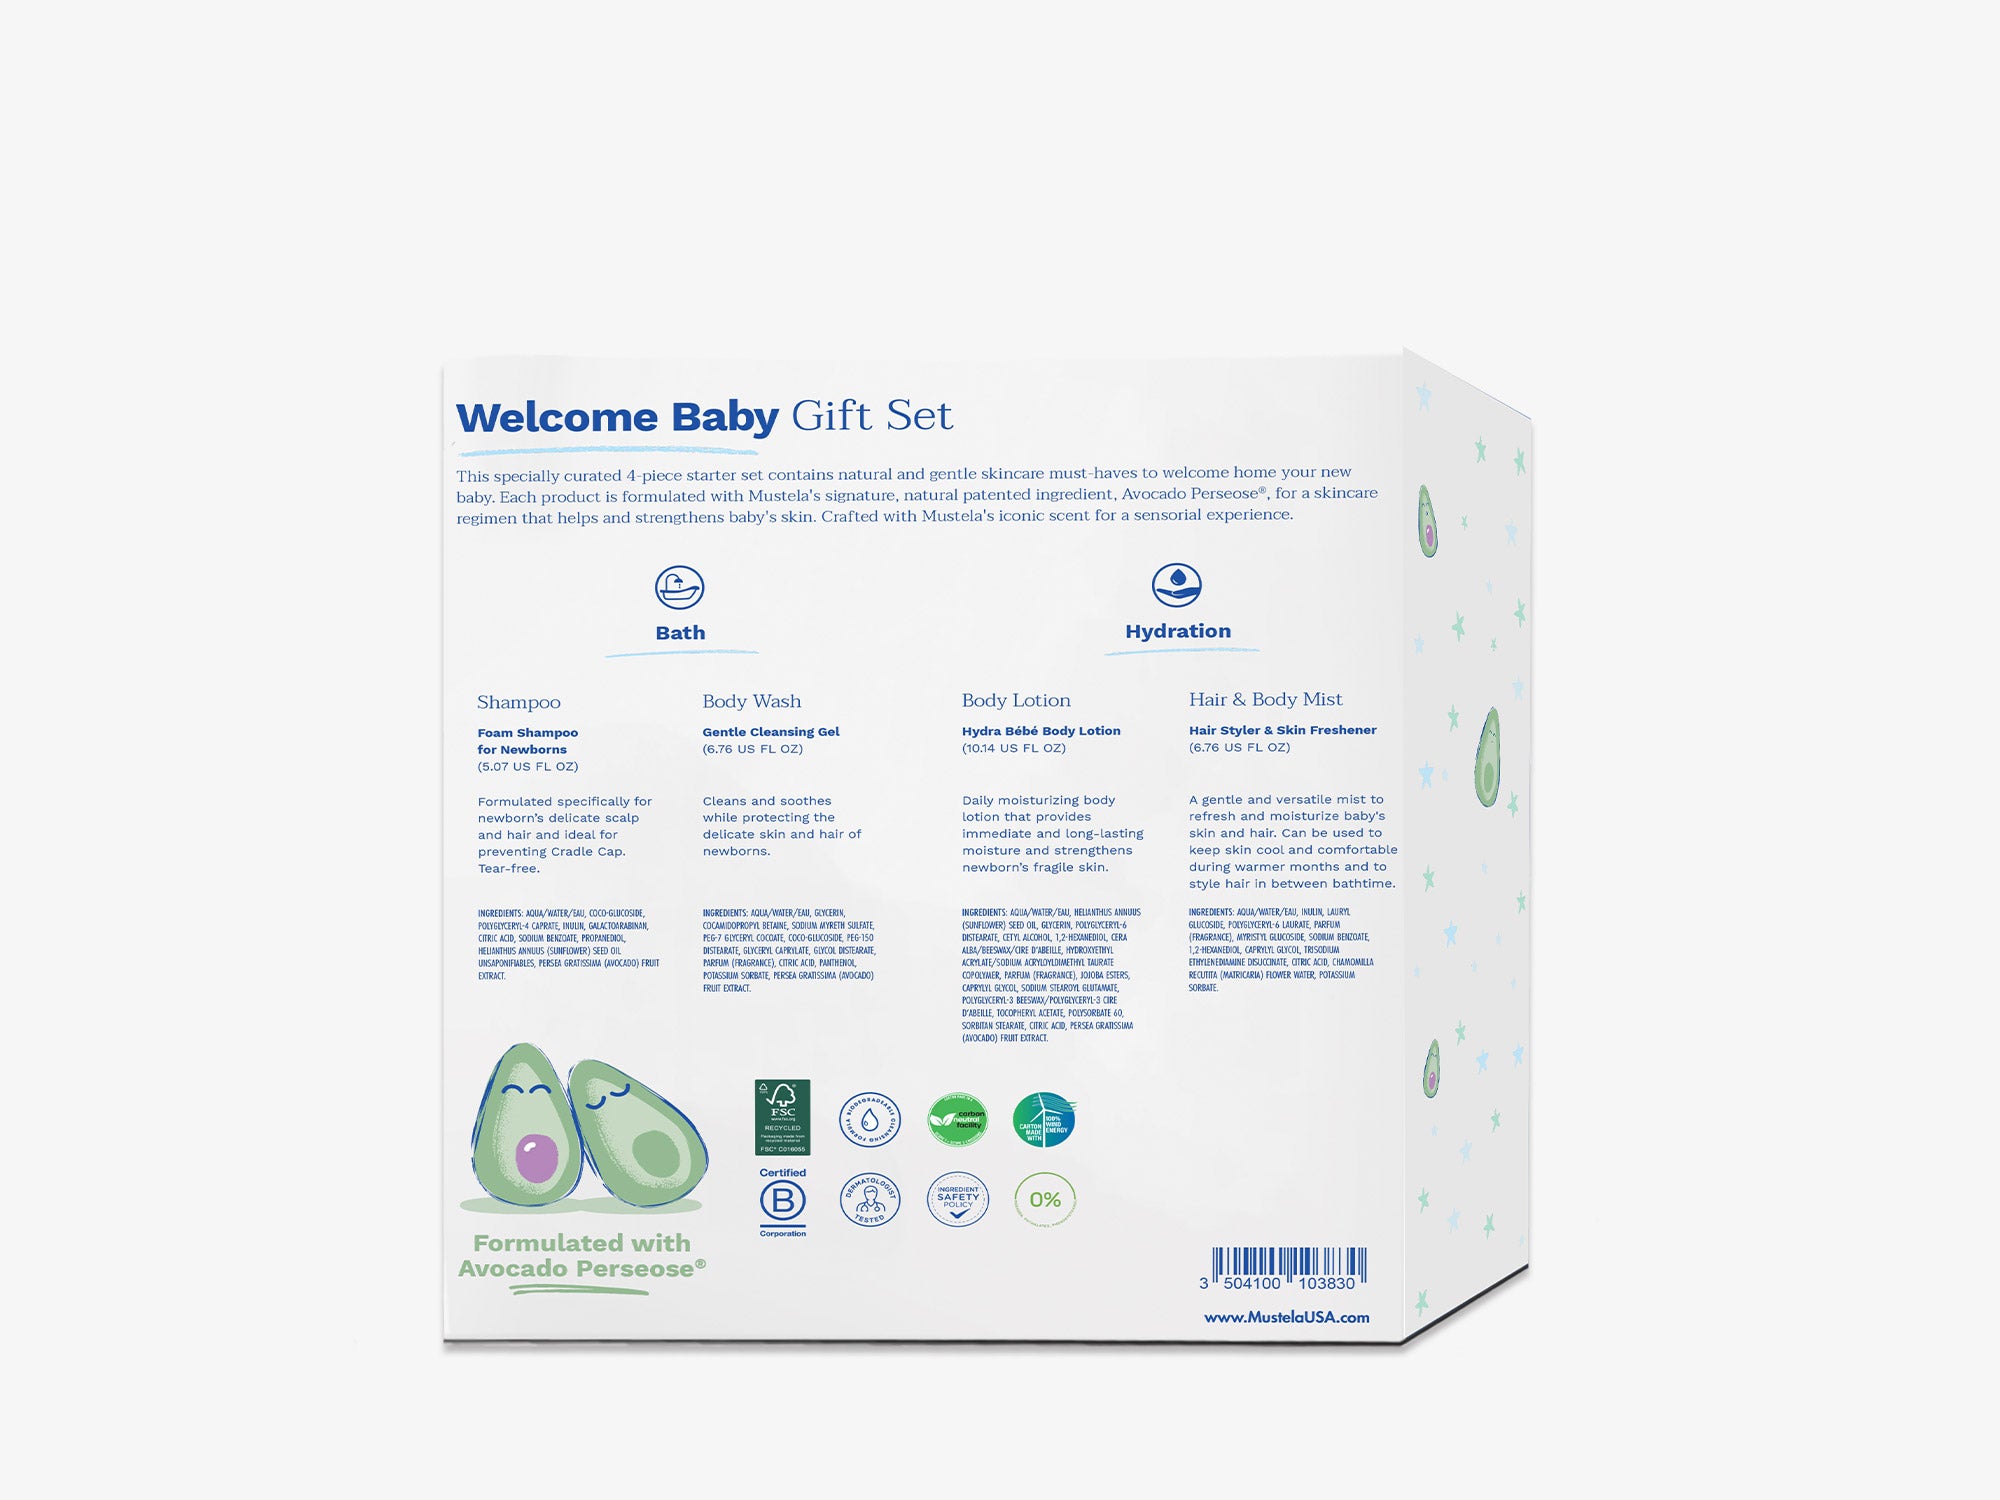  Mustela Newborn Arrival Gift Set - Baby Skincare & Bath Time  Essentials - Natural & Plant Based - 5 Items Set : Baby